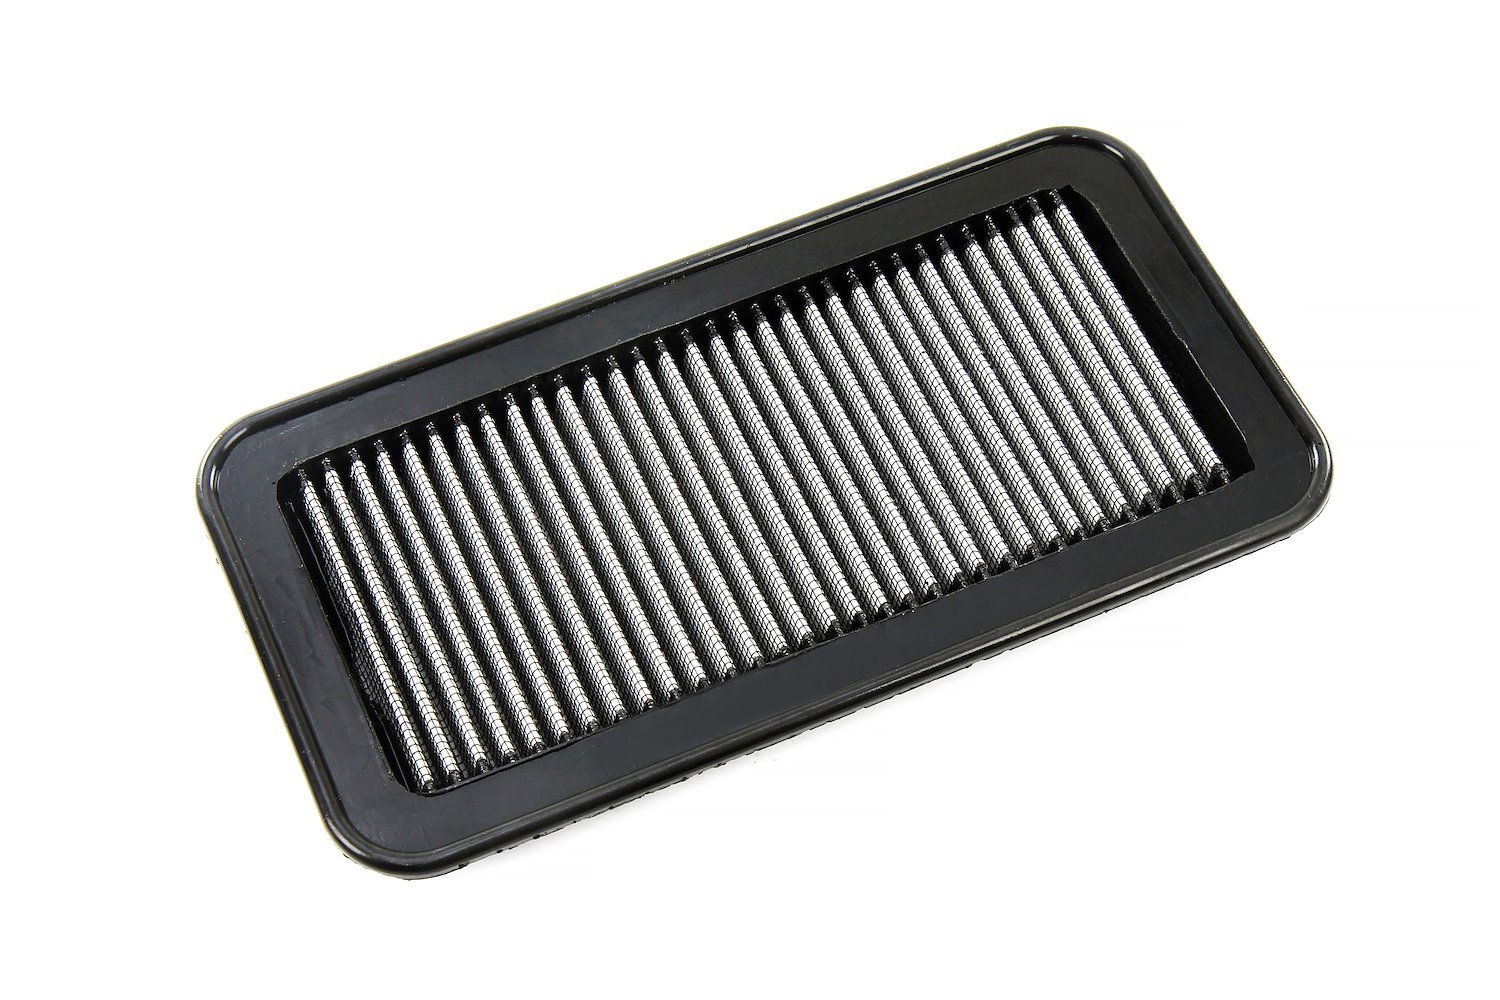 HPS-452319 Performance Drop-In Air Filter, Directly Replaces OEM Drop-In Panel Filter, Improves Performance & Fuel Economy